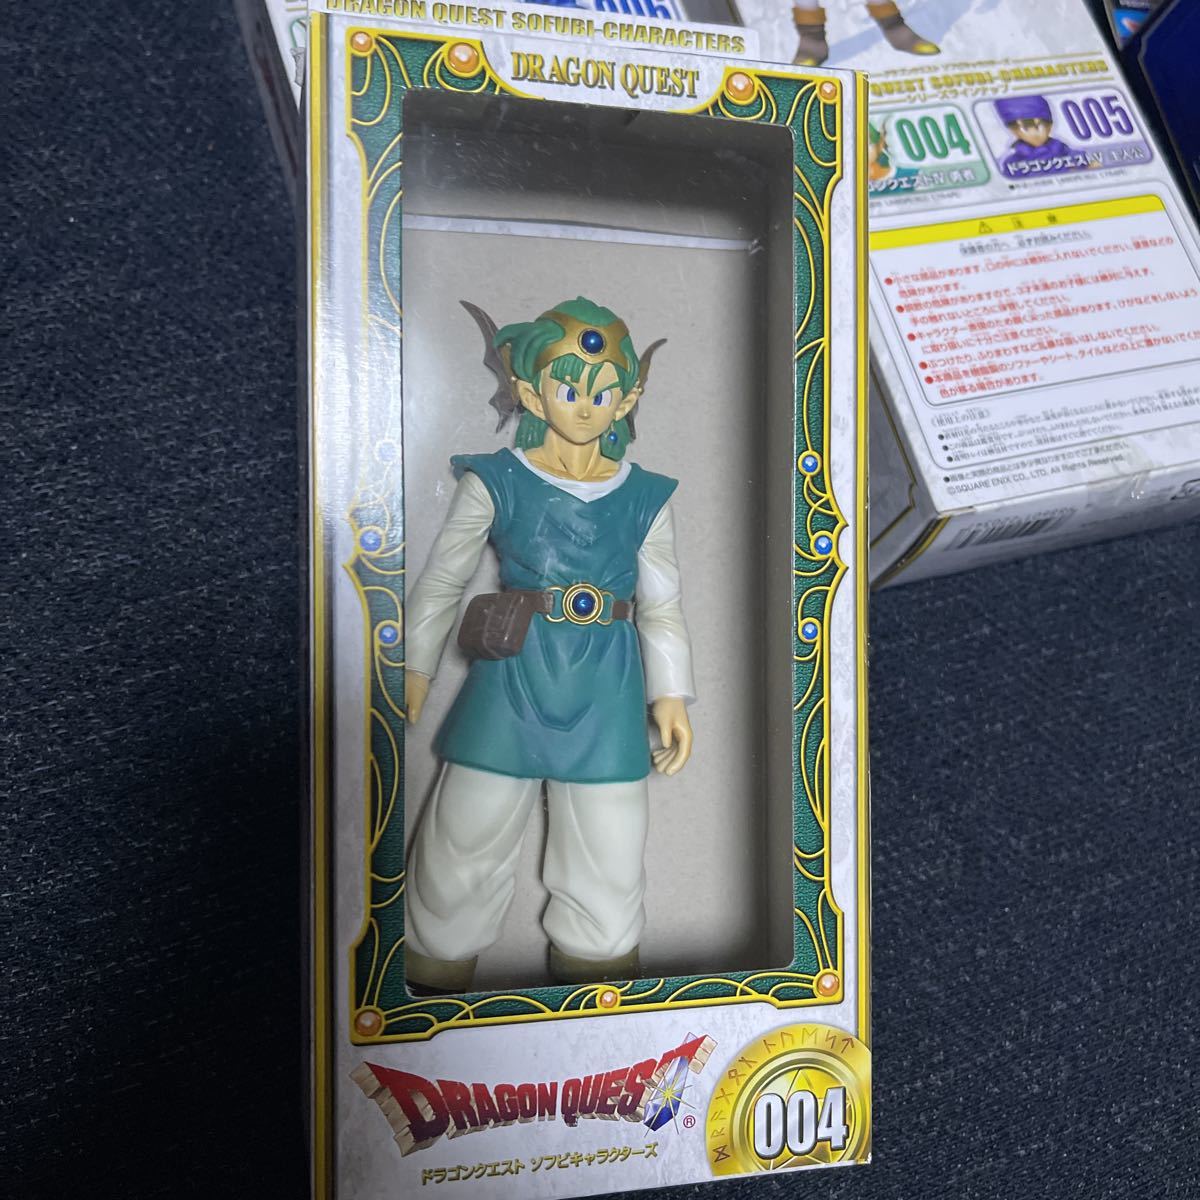  Dragon Quest sofvi character z001~006 all 6 kind full comp set breaking the seal settled box attaching gong ke figure item z guarantee Lee 